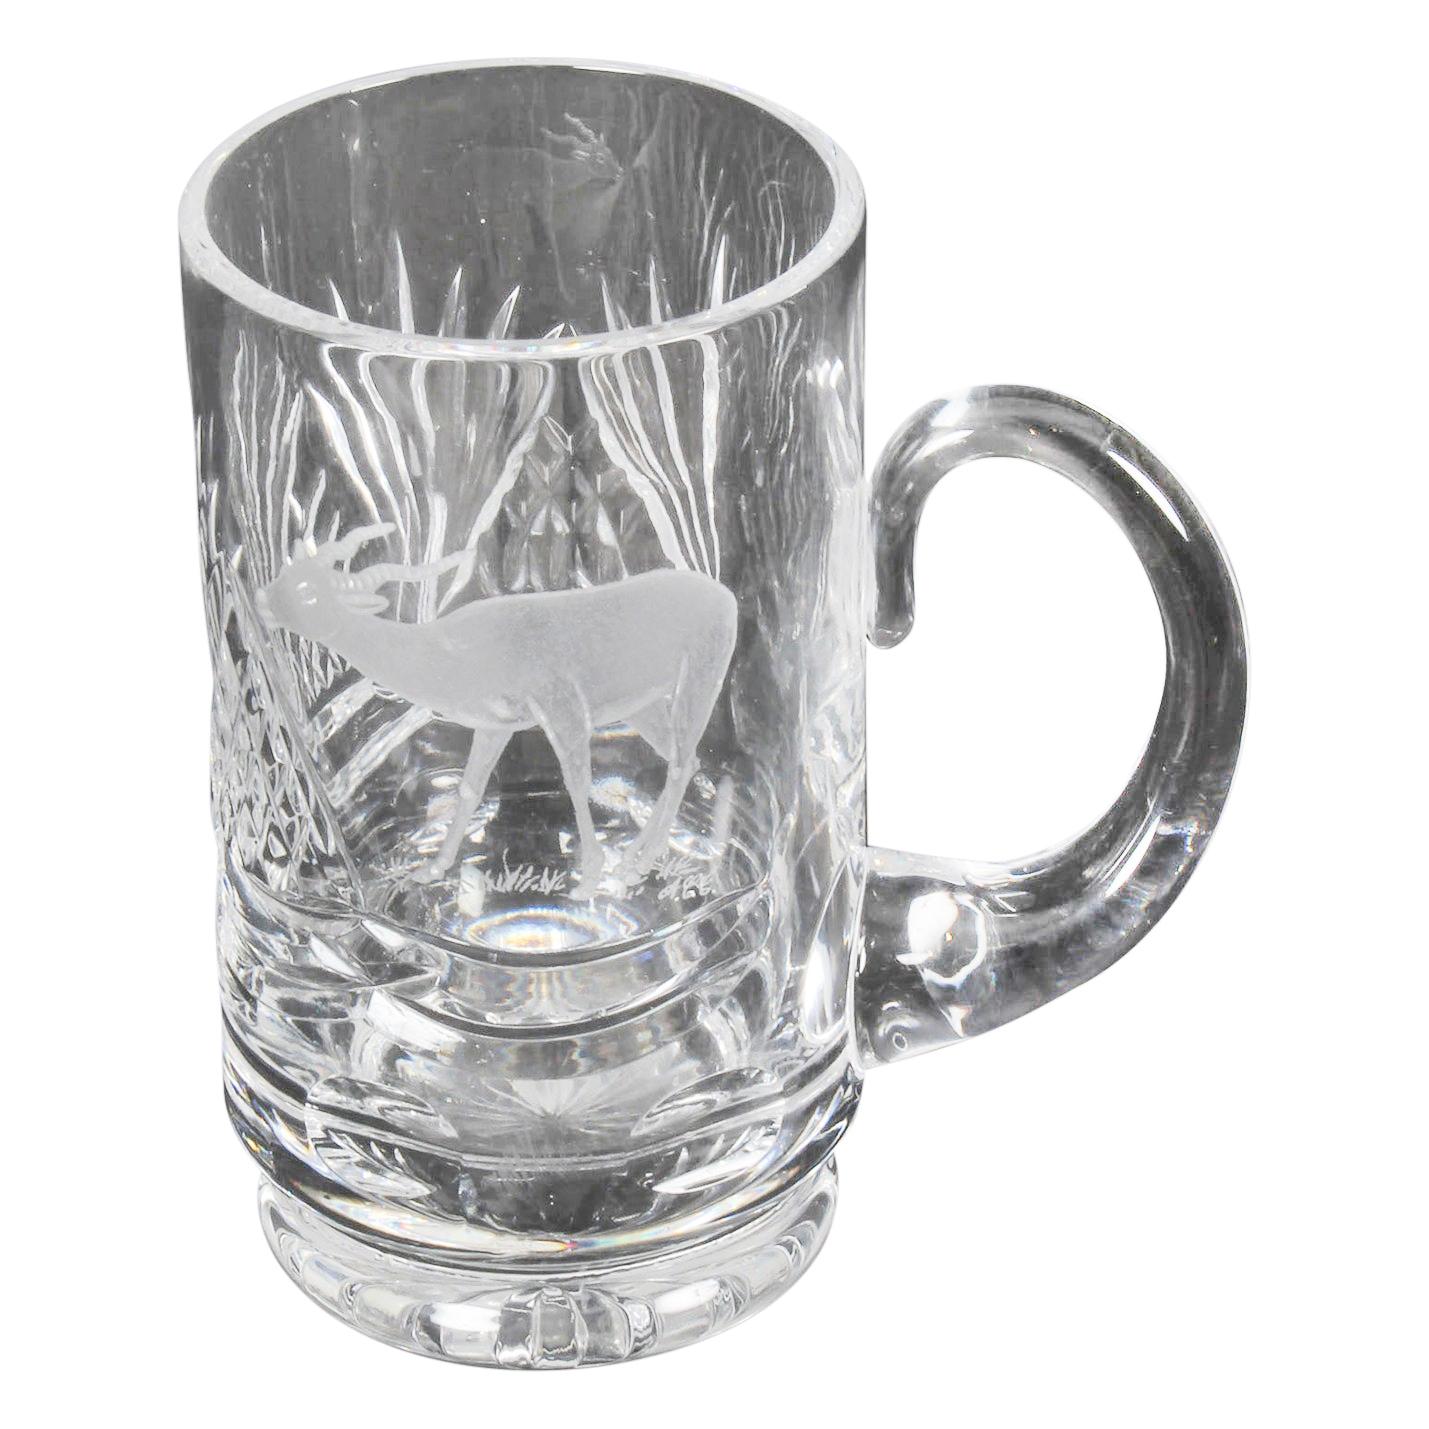 Vintage Cut Glass Tankard Engraved with Stag Signed ACC, Mid-20th Century For Sale